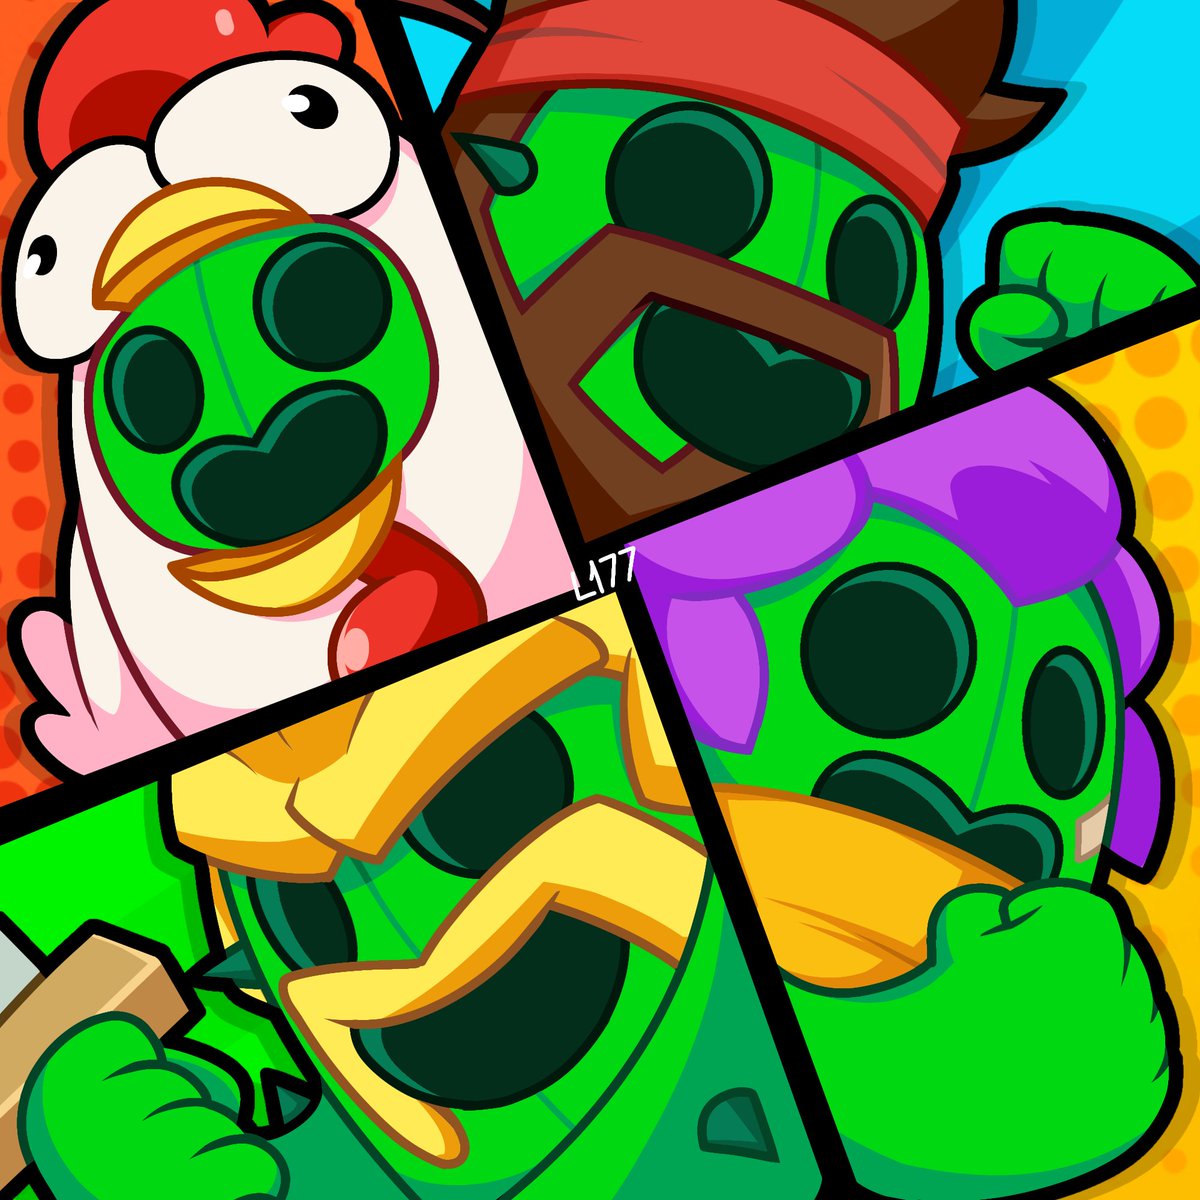 Spike Busters (Better version of Squad Busters) #SquadBusters #BrawlStars